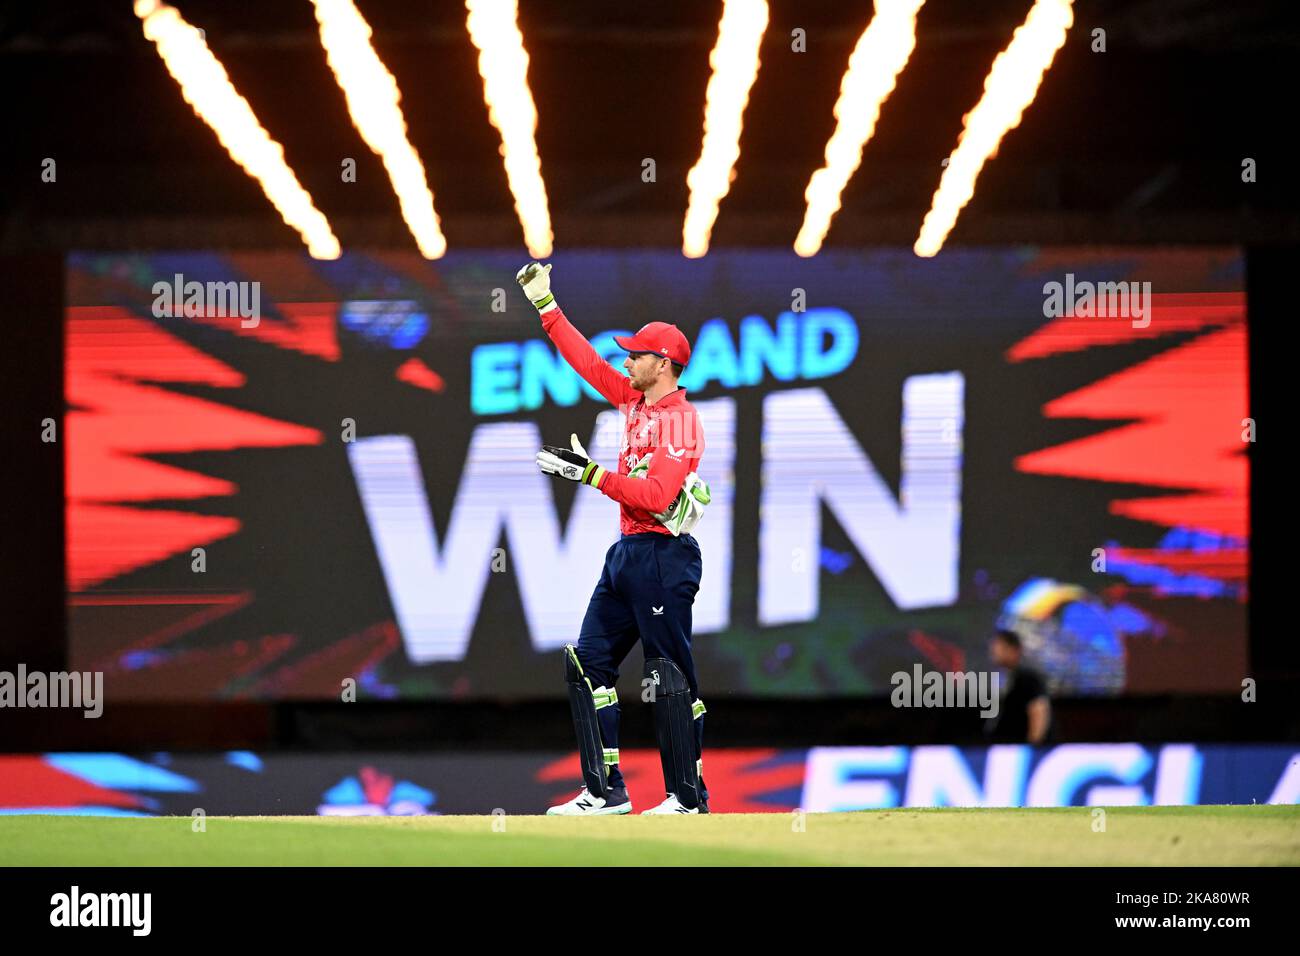 England's Jos Buttler celebrates winning following the T20 World Cup Super 12 match at The Gabba in Brisbane, Australia. Picture date: Tuesday November 1, 2022. Stock Photo